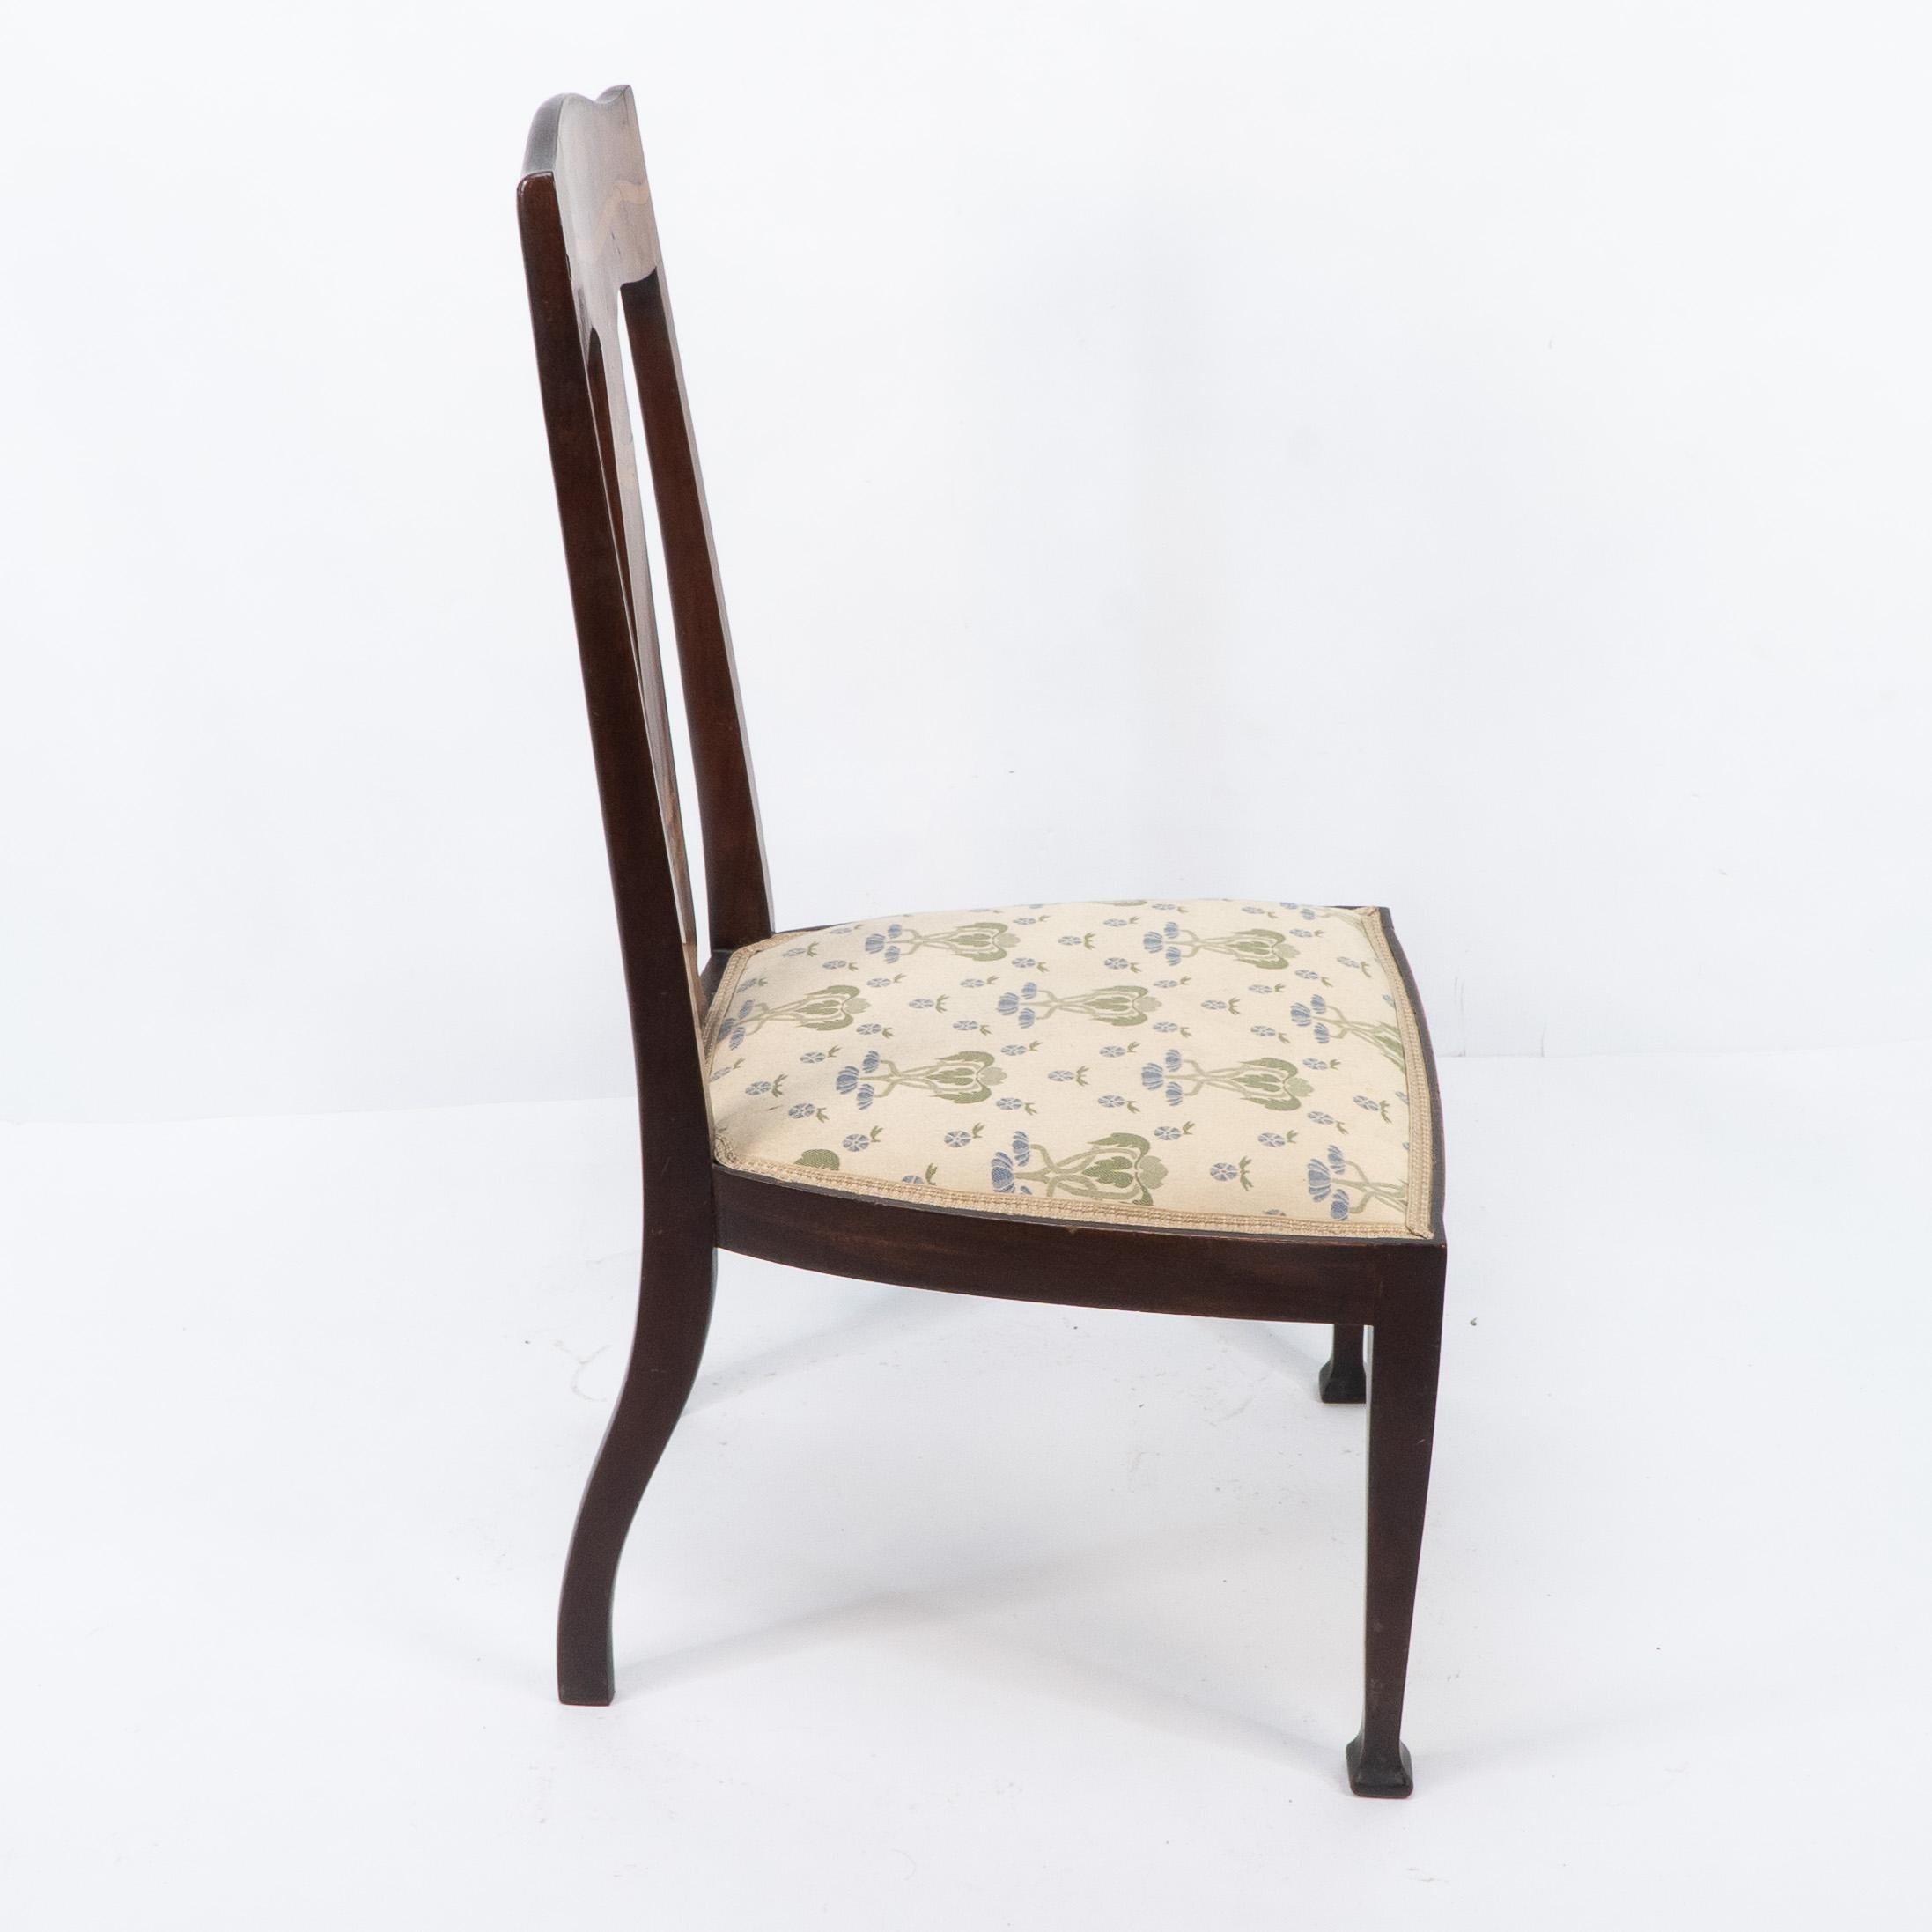 Arts and Crafts Jas Shoolbred. Arts & Crafts Mahogany Rosewood Chair With stylized Floral Inlay For Sale